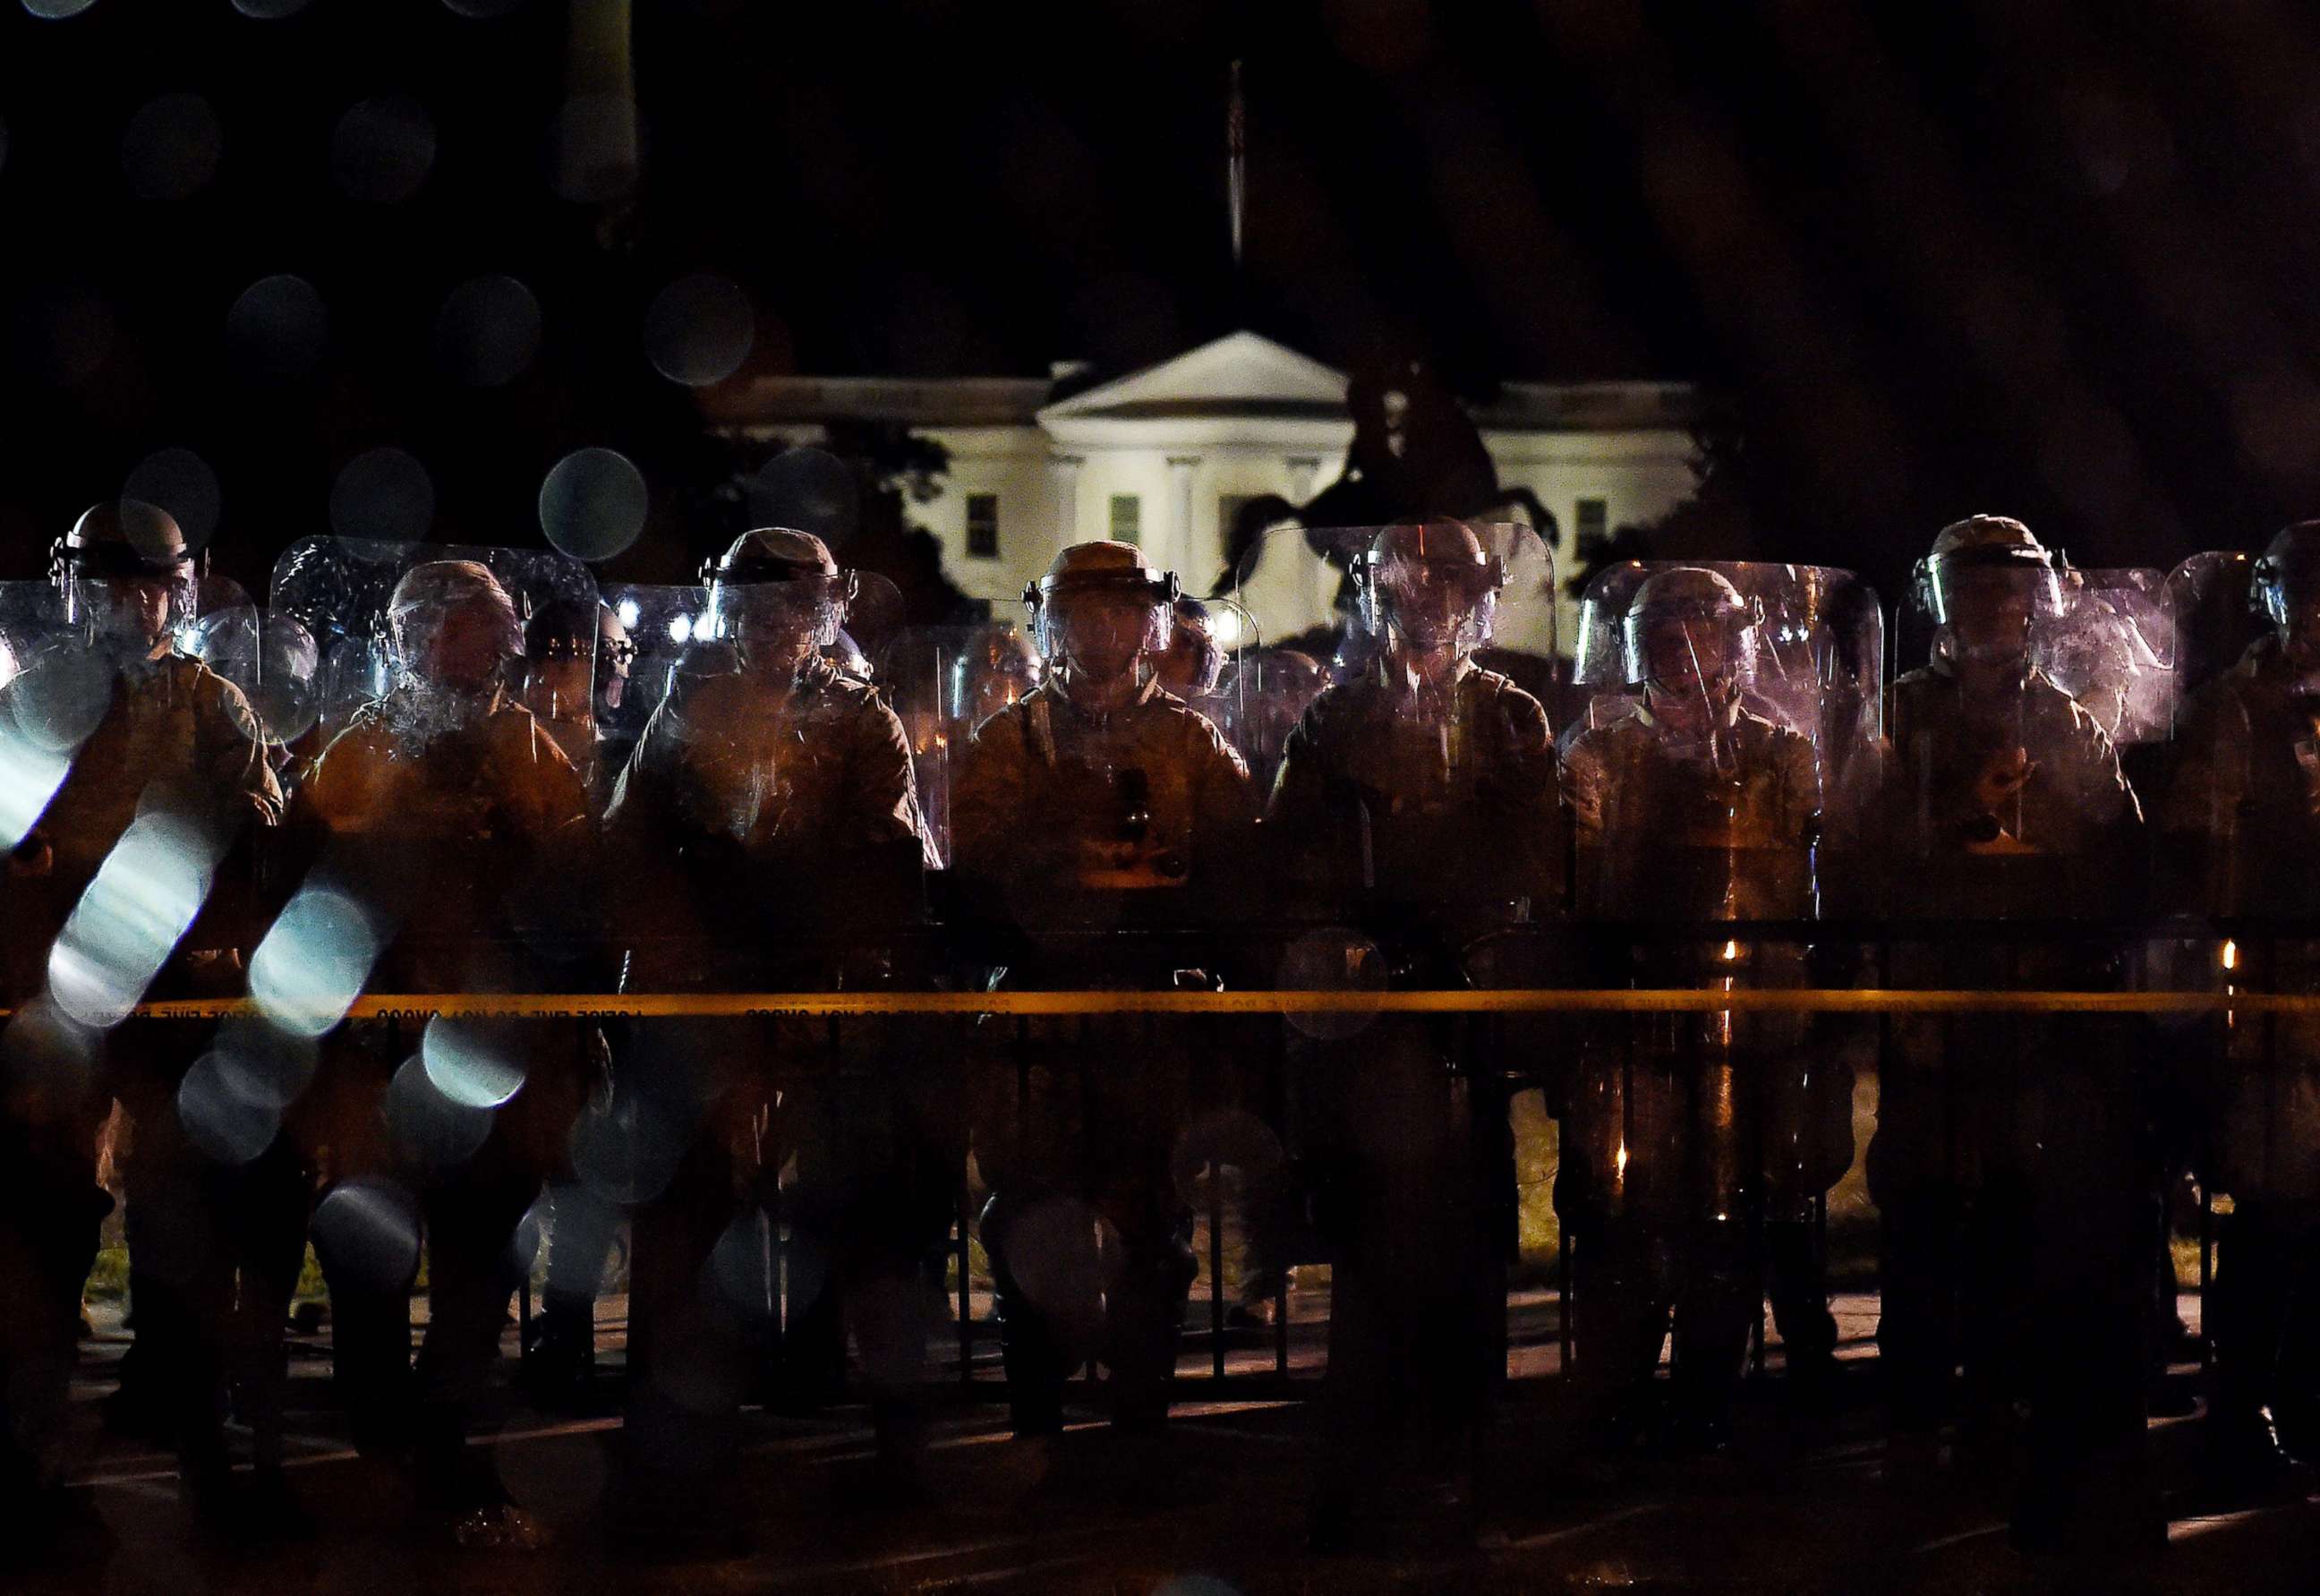 PHOTO: Police hold a perimeter near the White House as demonstrators gather to protest the death of George Floyd while in police custody, June 2, 2020, in Washington, D.C.